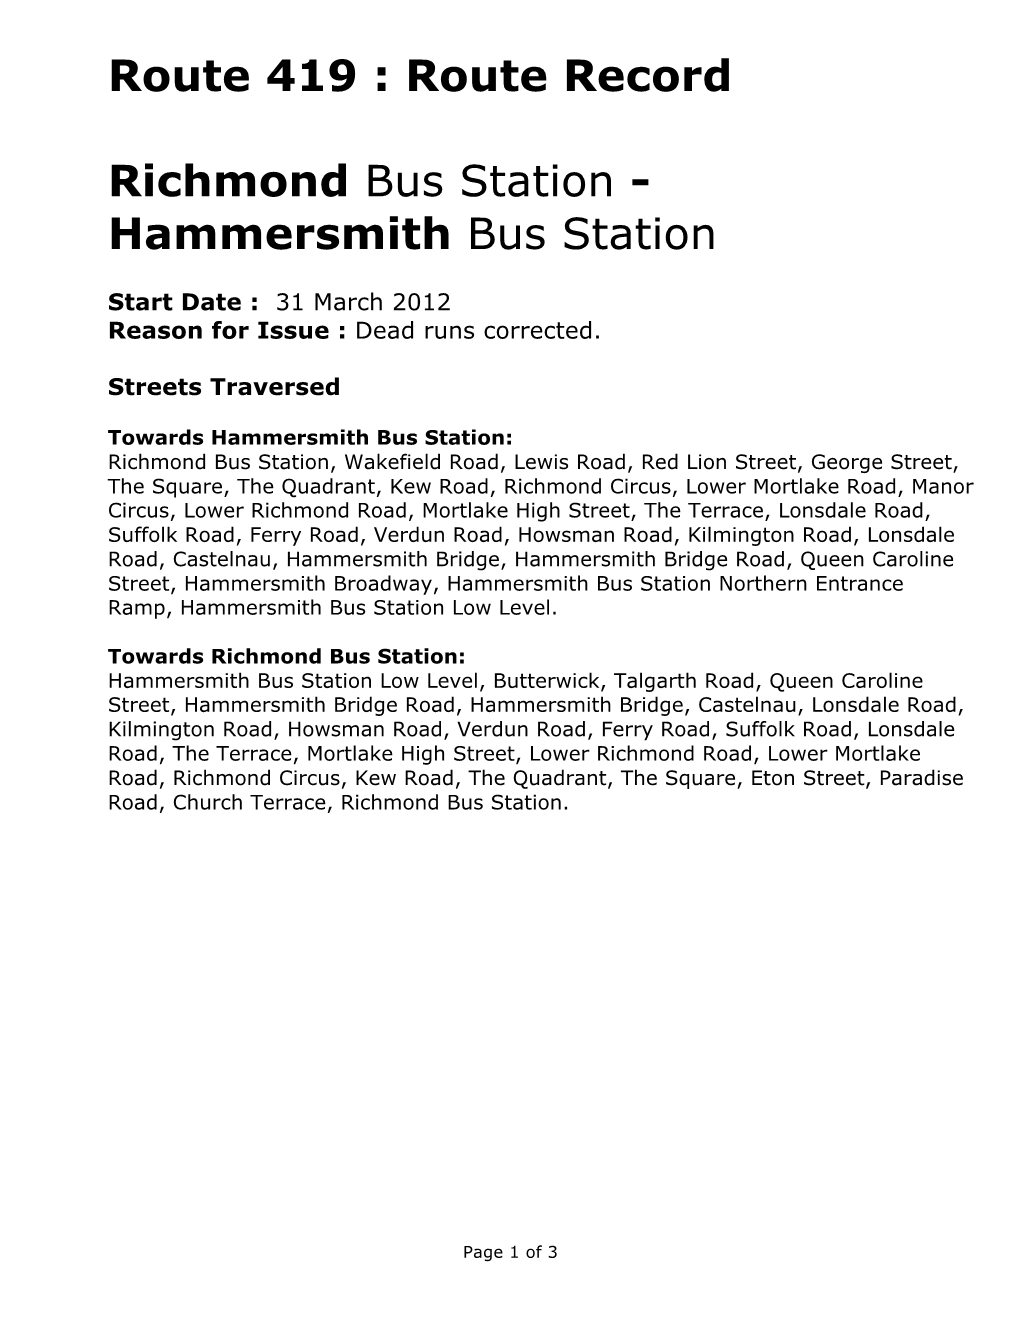 Route 419 : Route Record Richmond Bus Station